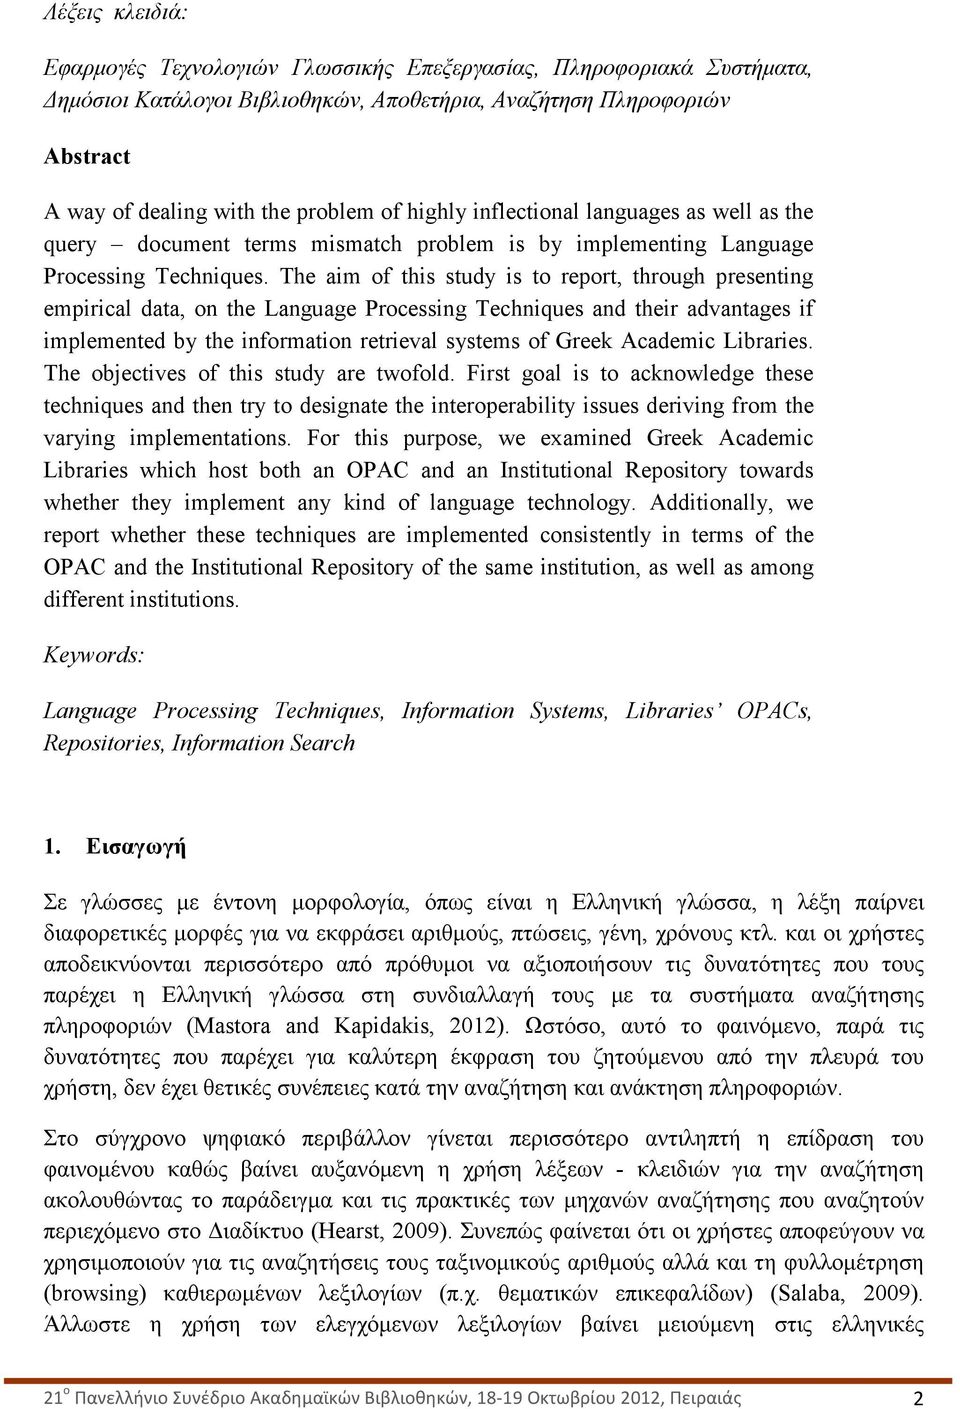 The aim of this study is to report, through presenting empirical data, on the Language Processing Techniques and their advantages if implemented by the information retrieval systems of Greek Academic